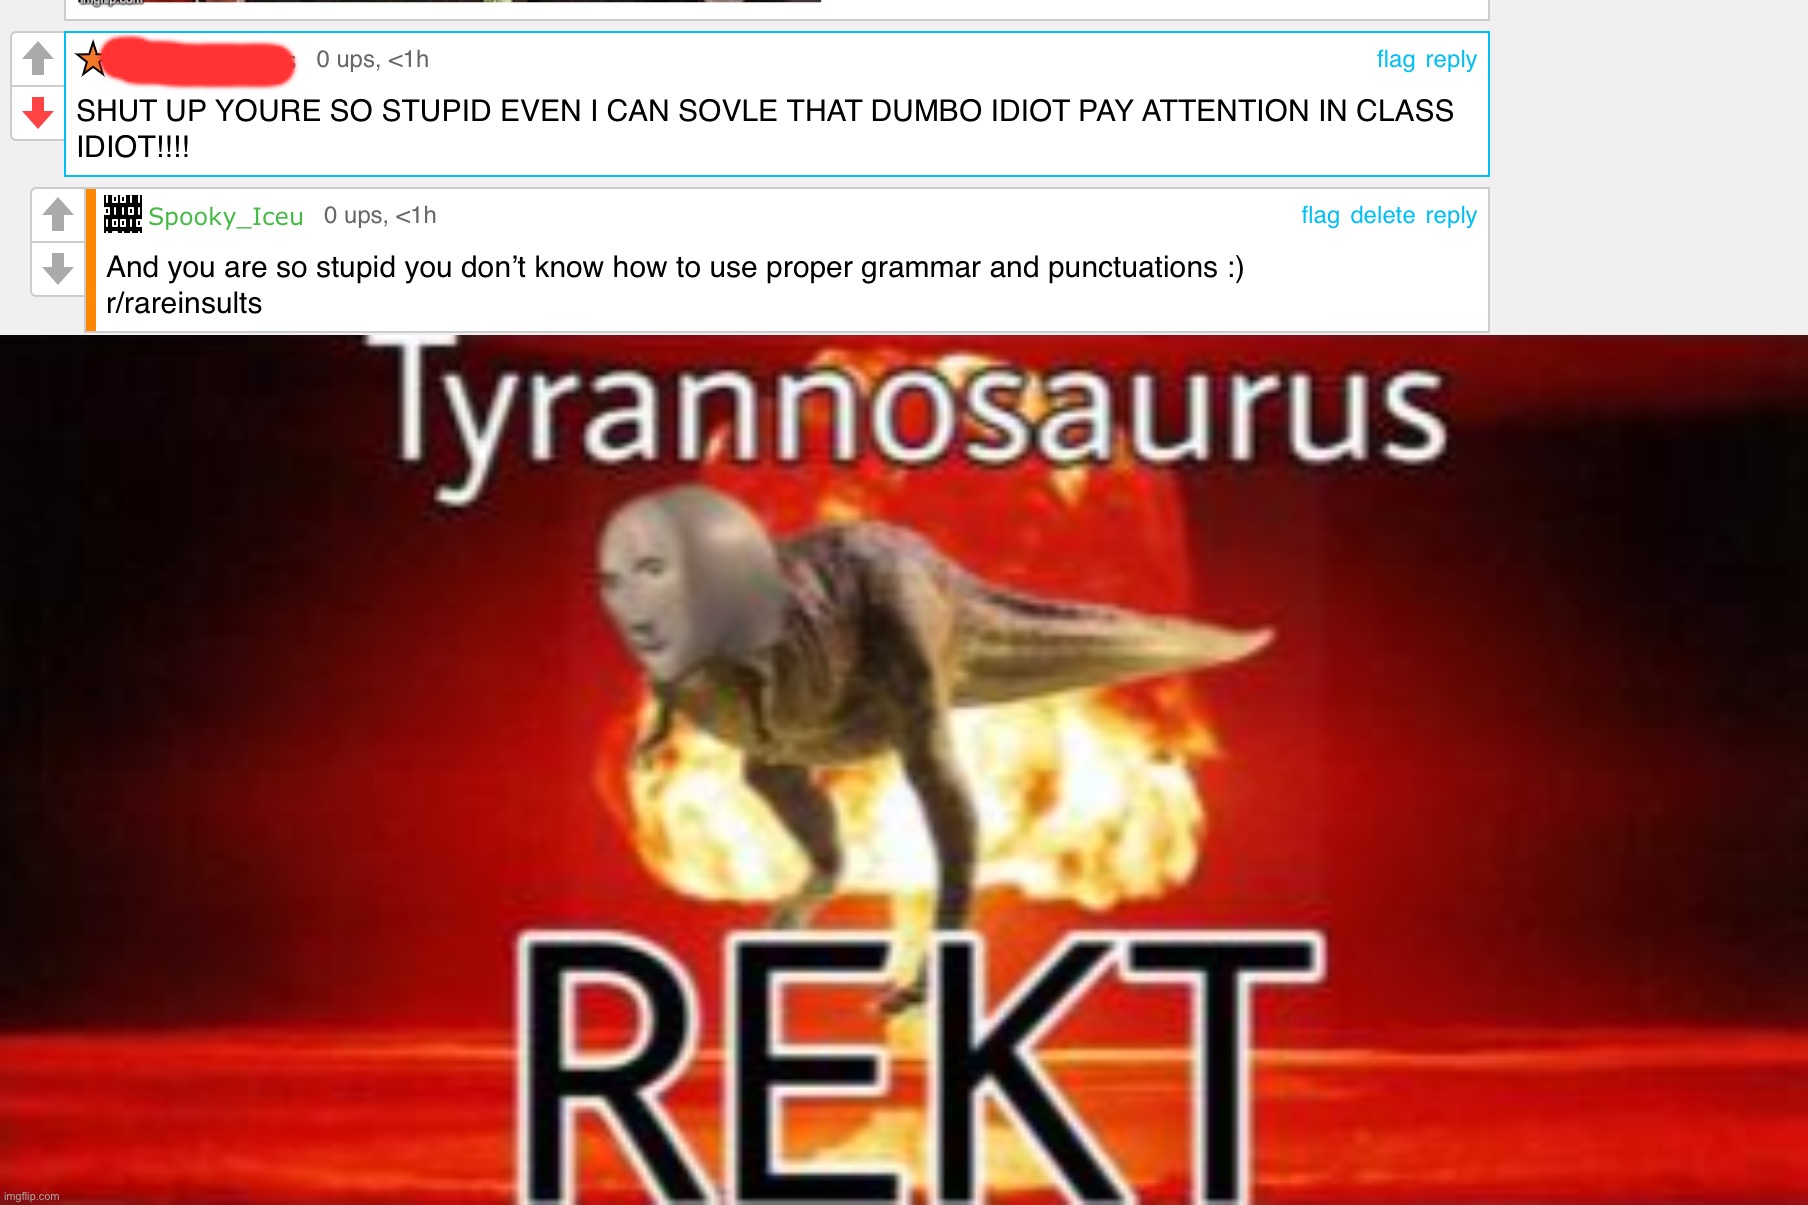 Tyrannosaurus REKT | image tagged in tyrannosaurus rekt,memes,funny,comments,roasted | made w/ Imgflip meme maker